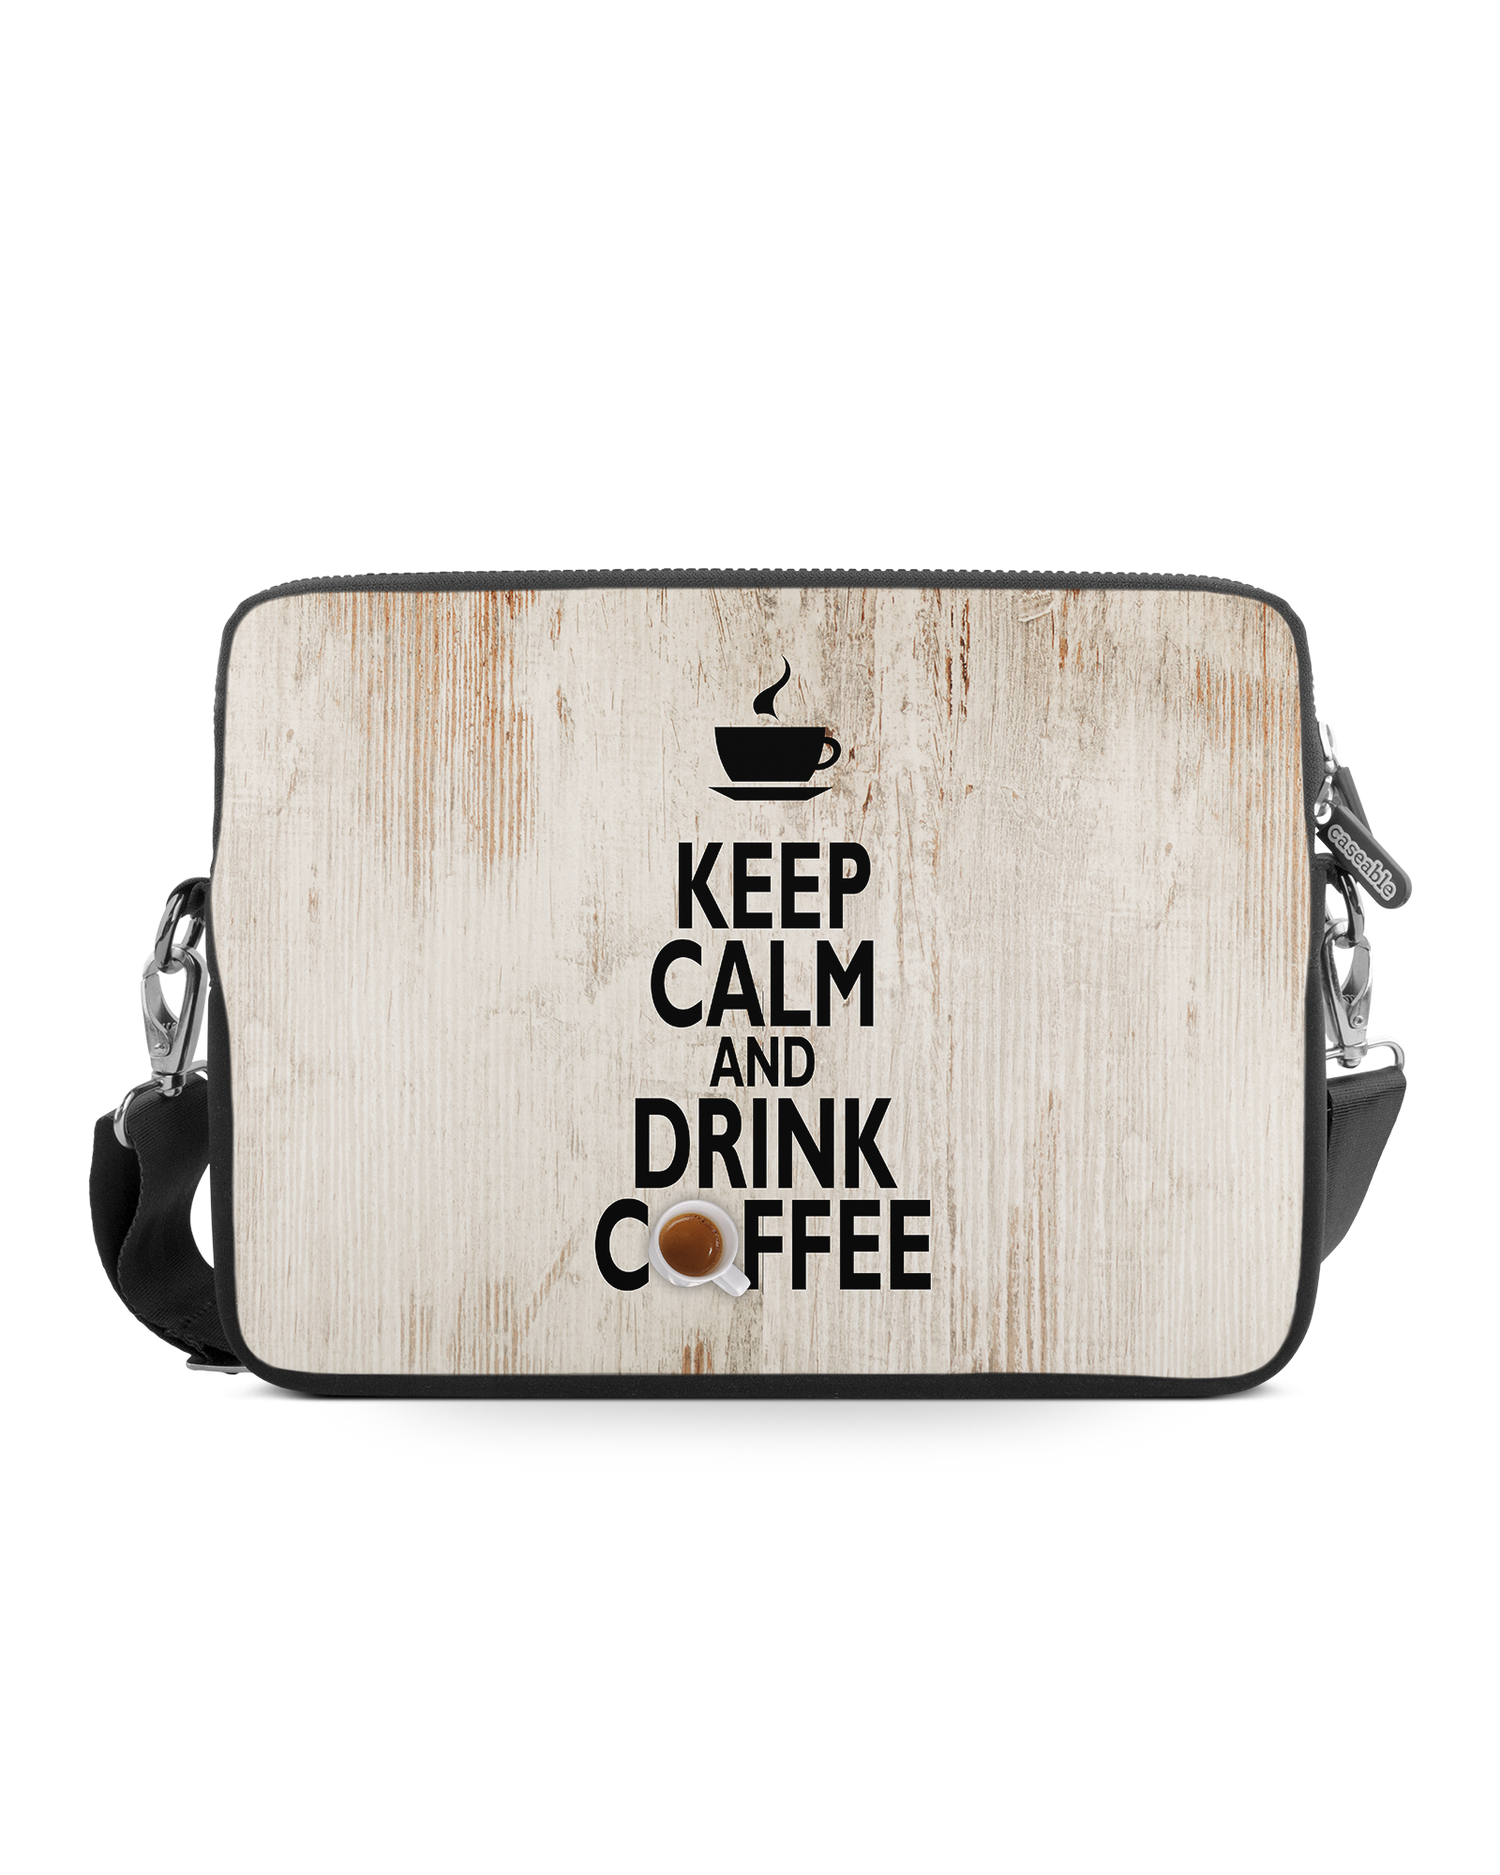 Drink Coffee Premium Laptop Bag 15 inch: Front View